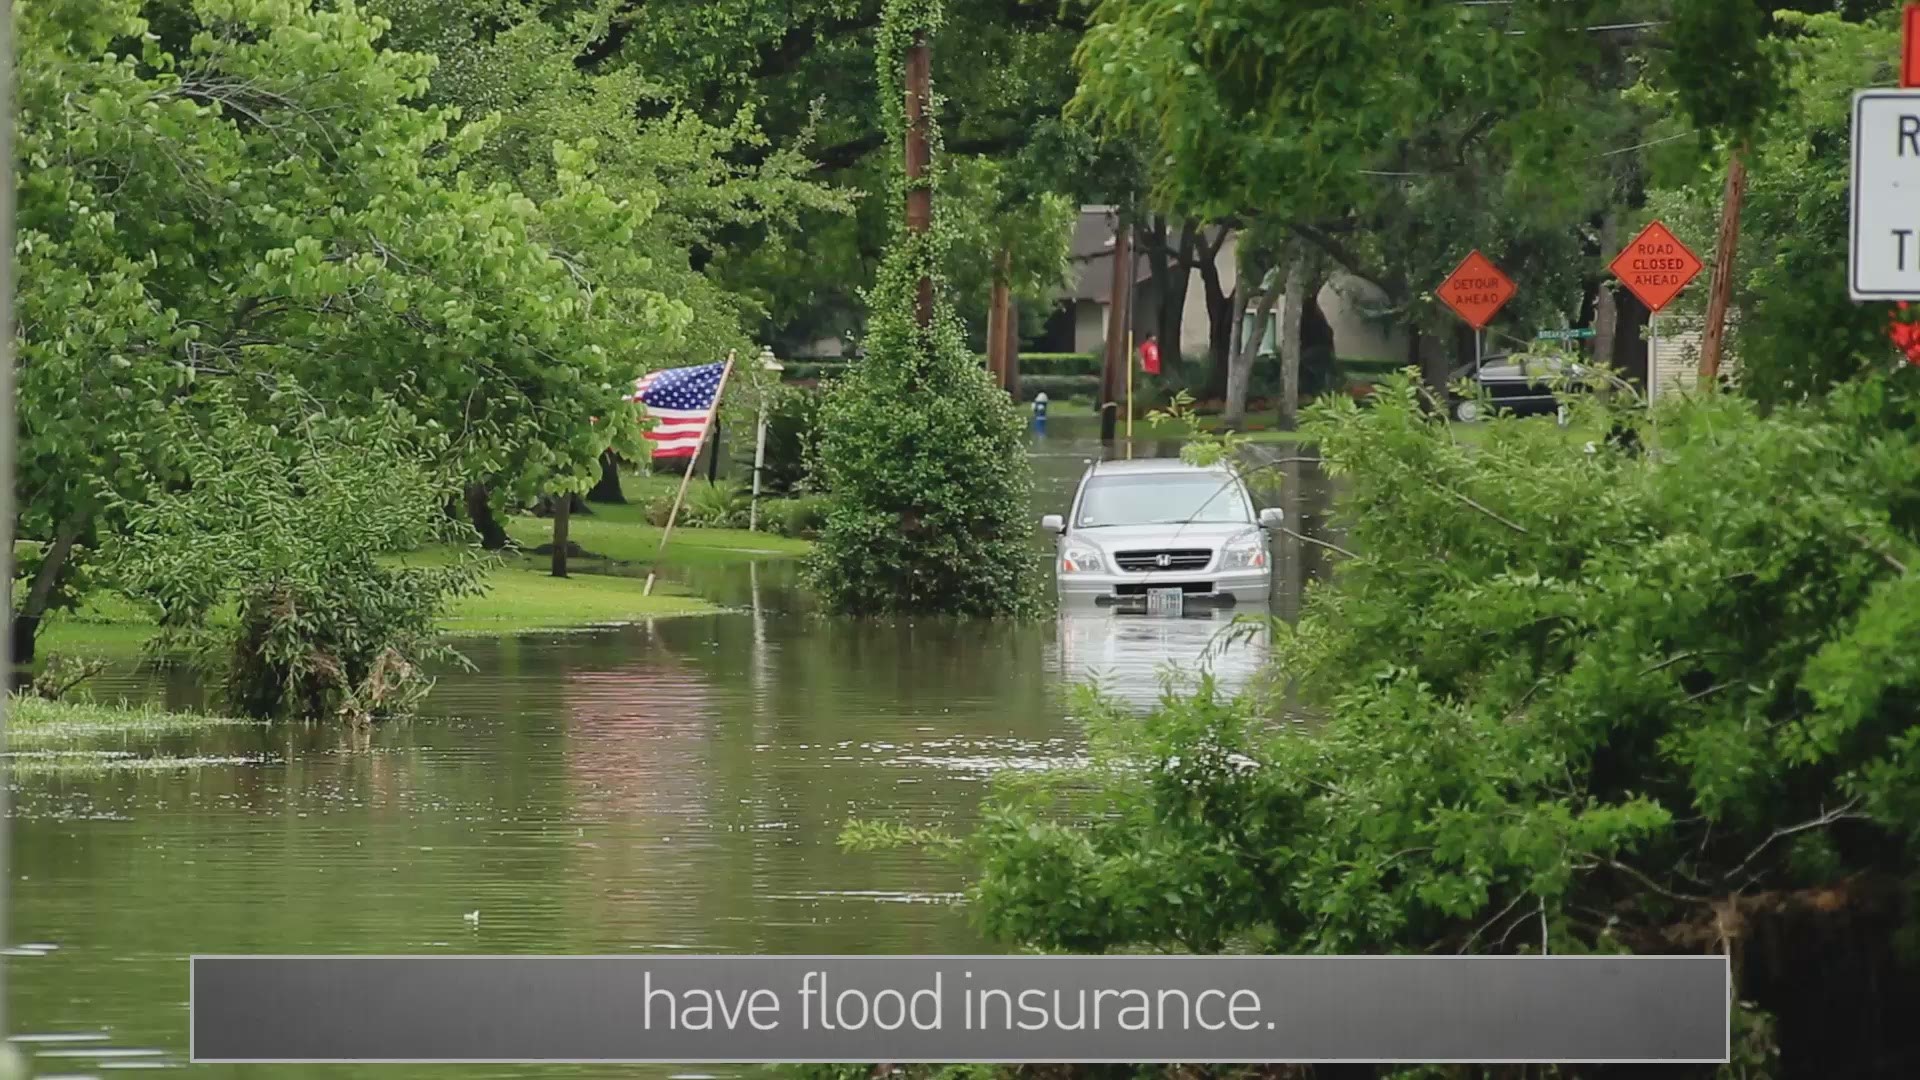 Don't fall for insurance scams after a big storm! Here are some tips to be aware of.